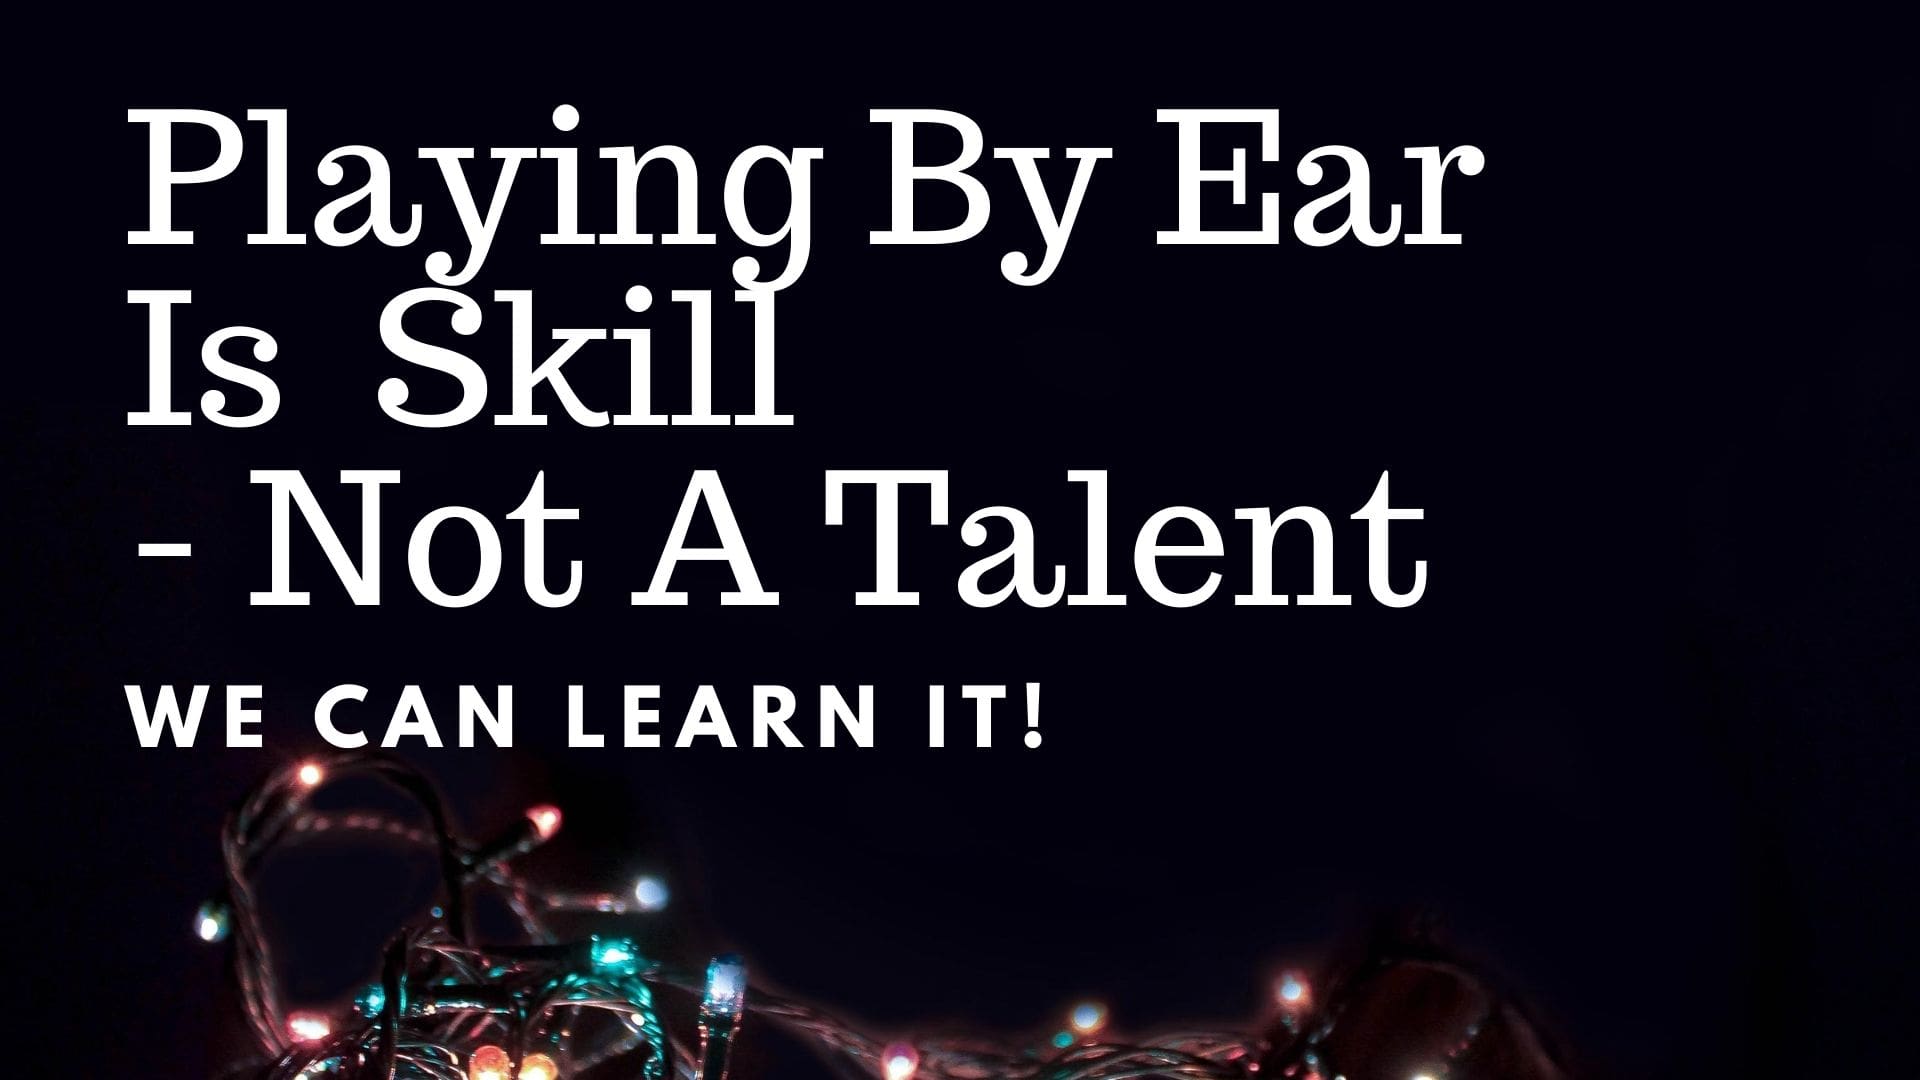 Playing By Ear is a Skill Not A Talent